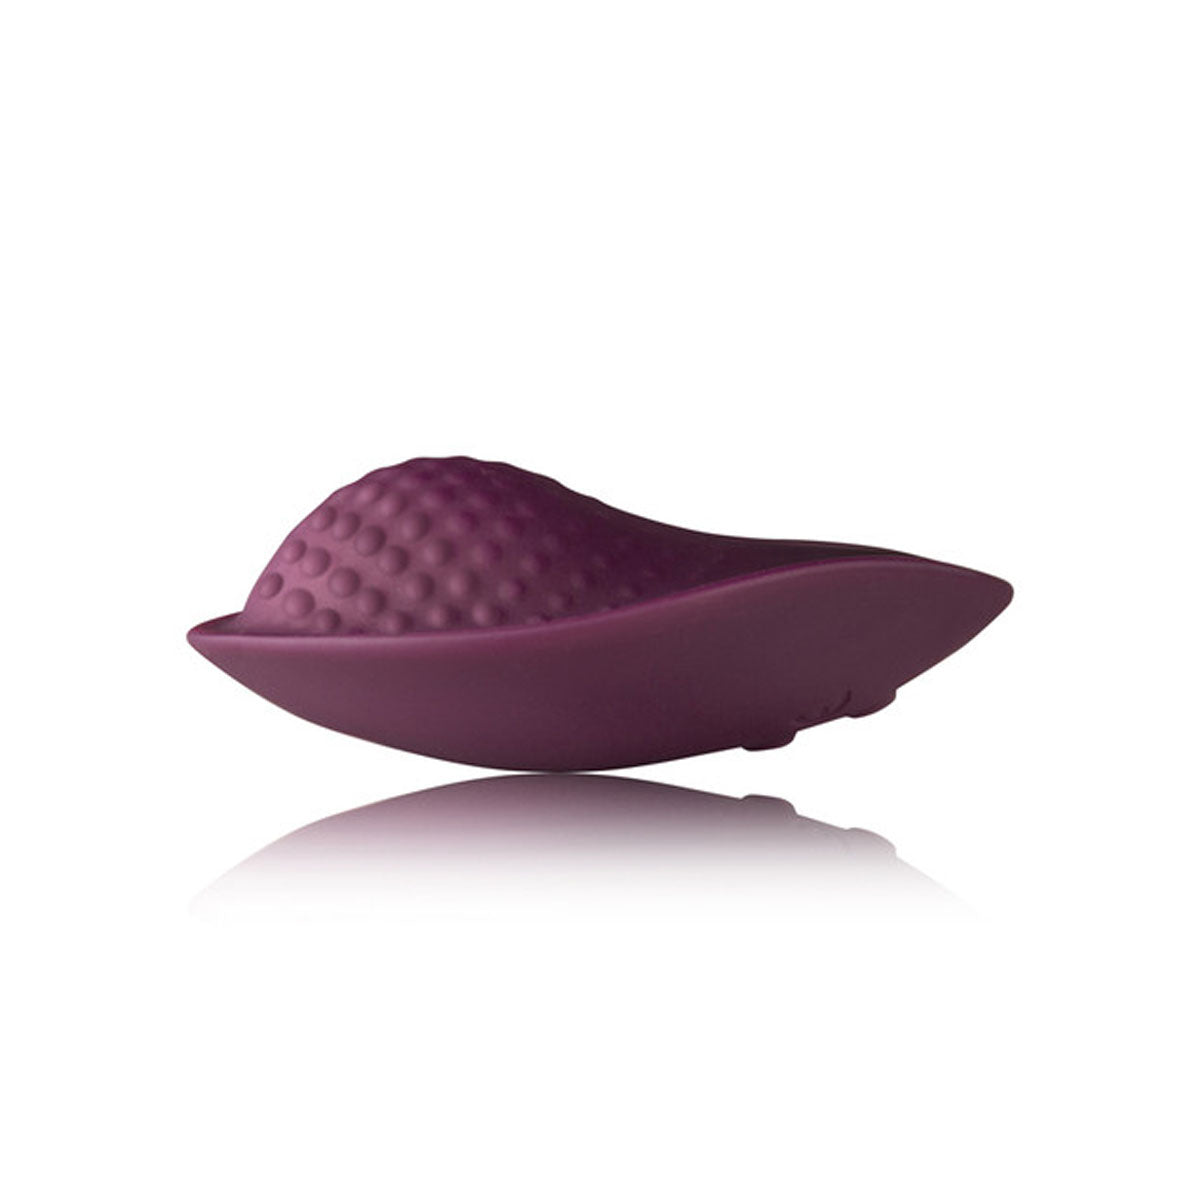 Side view of burgundy silicone vibrator with bumpy texture  on the top side Nudie Co